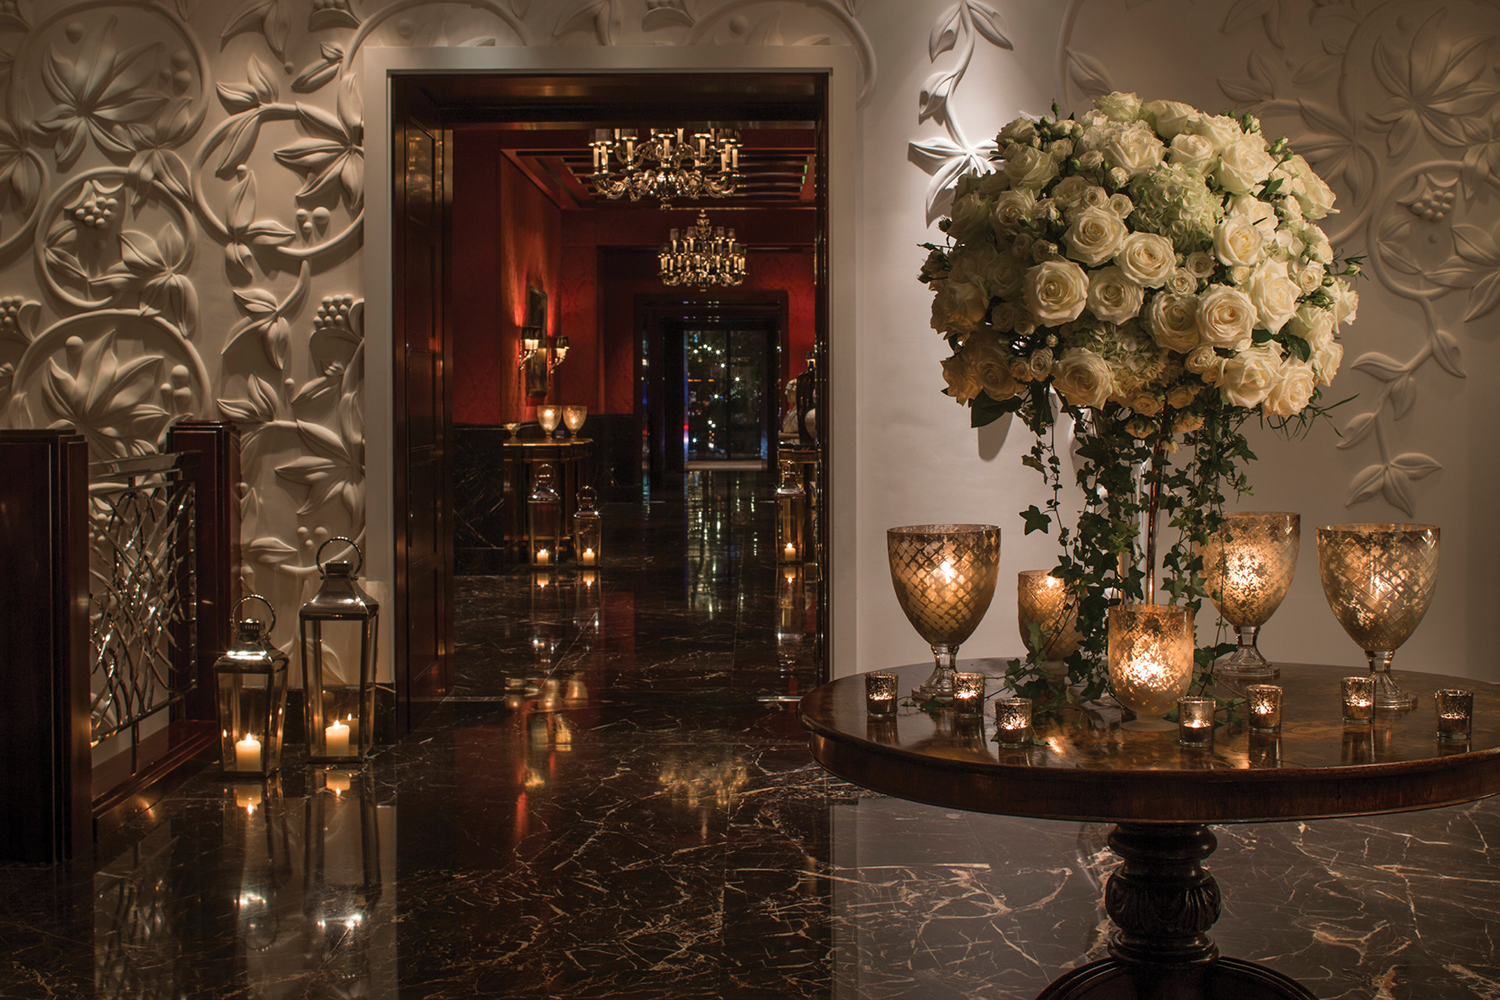 Four Seasons Table and Candles leading into another room elegant.